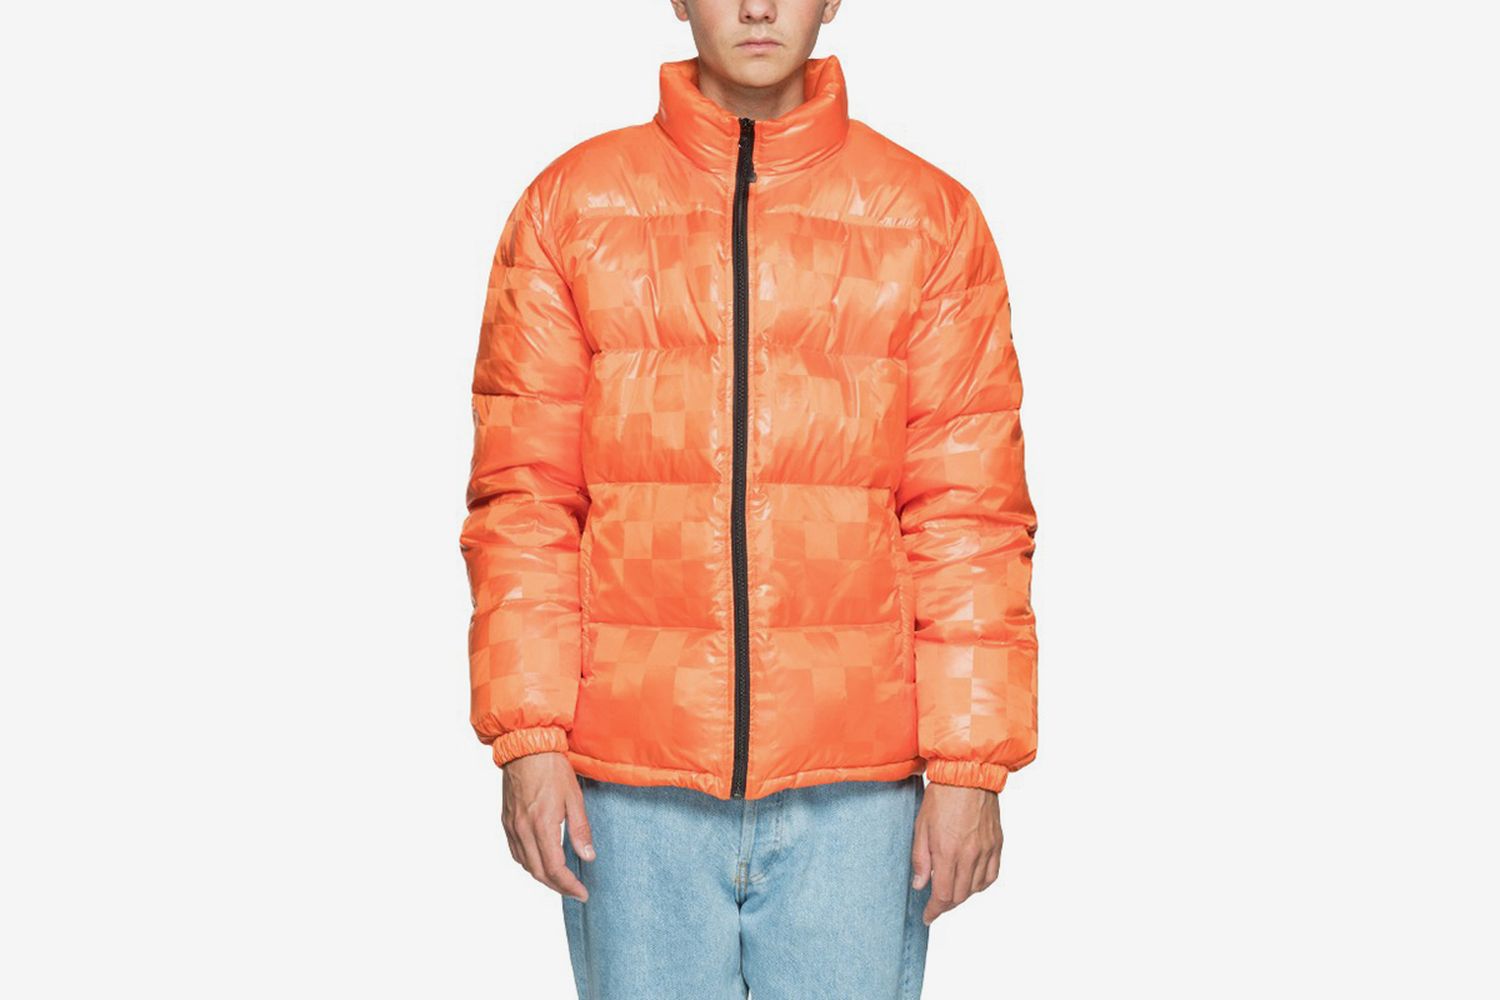 17 of the Best Puffer Jackets to Buy this Season